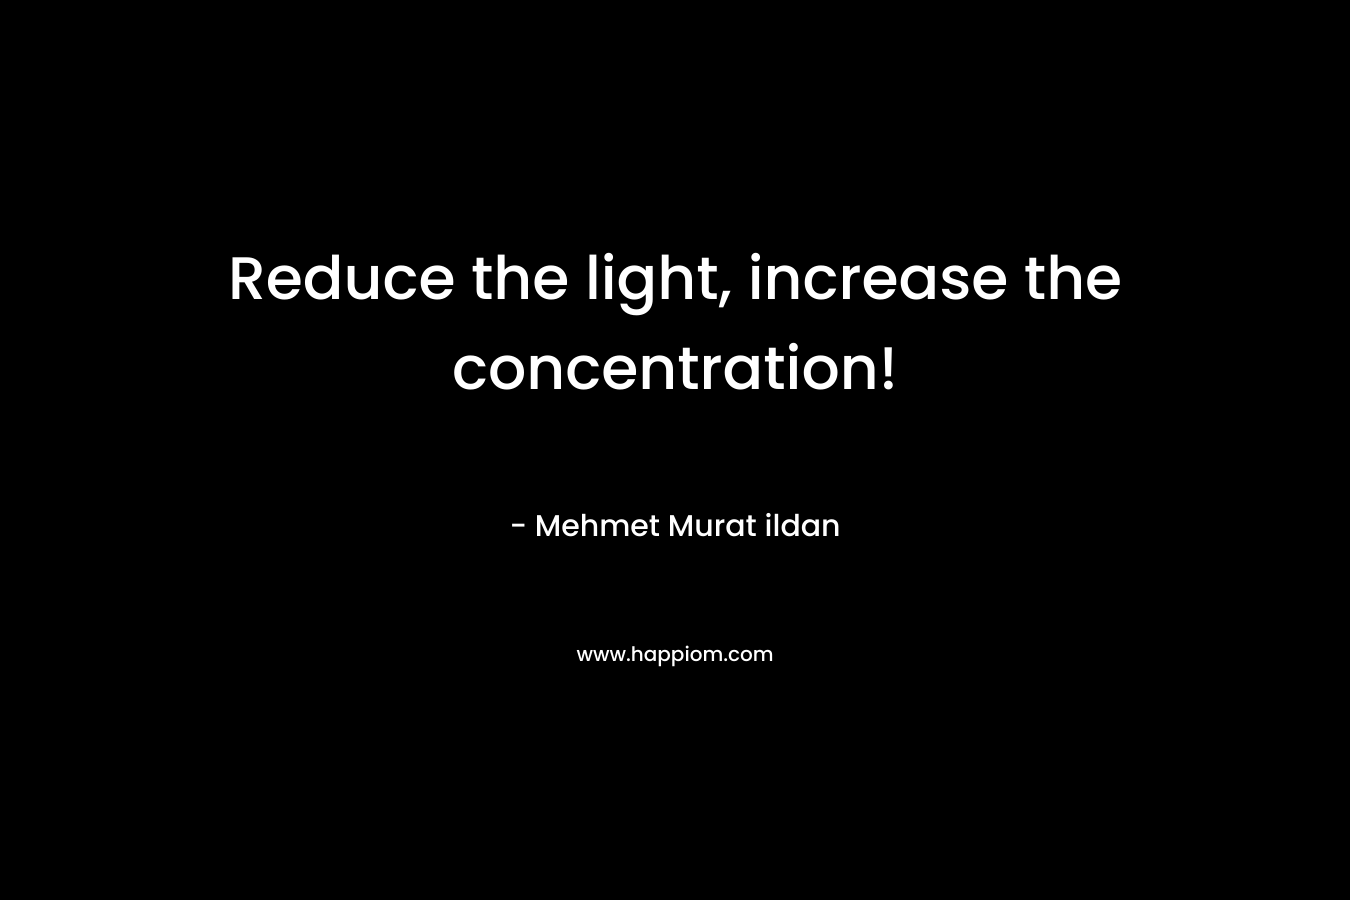 Reduce the light, increase the concentration!